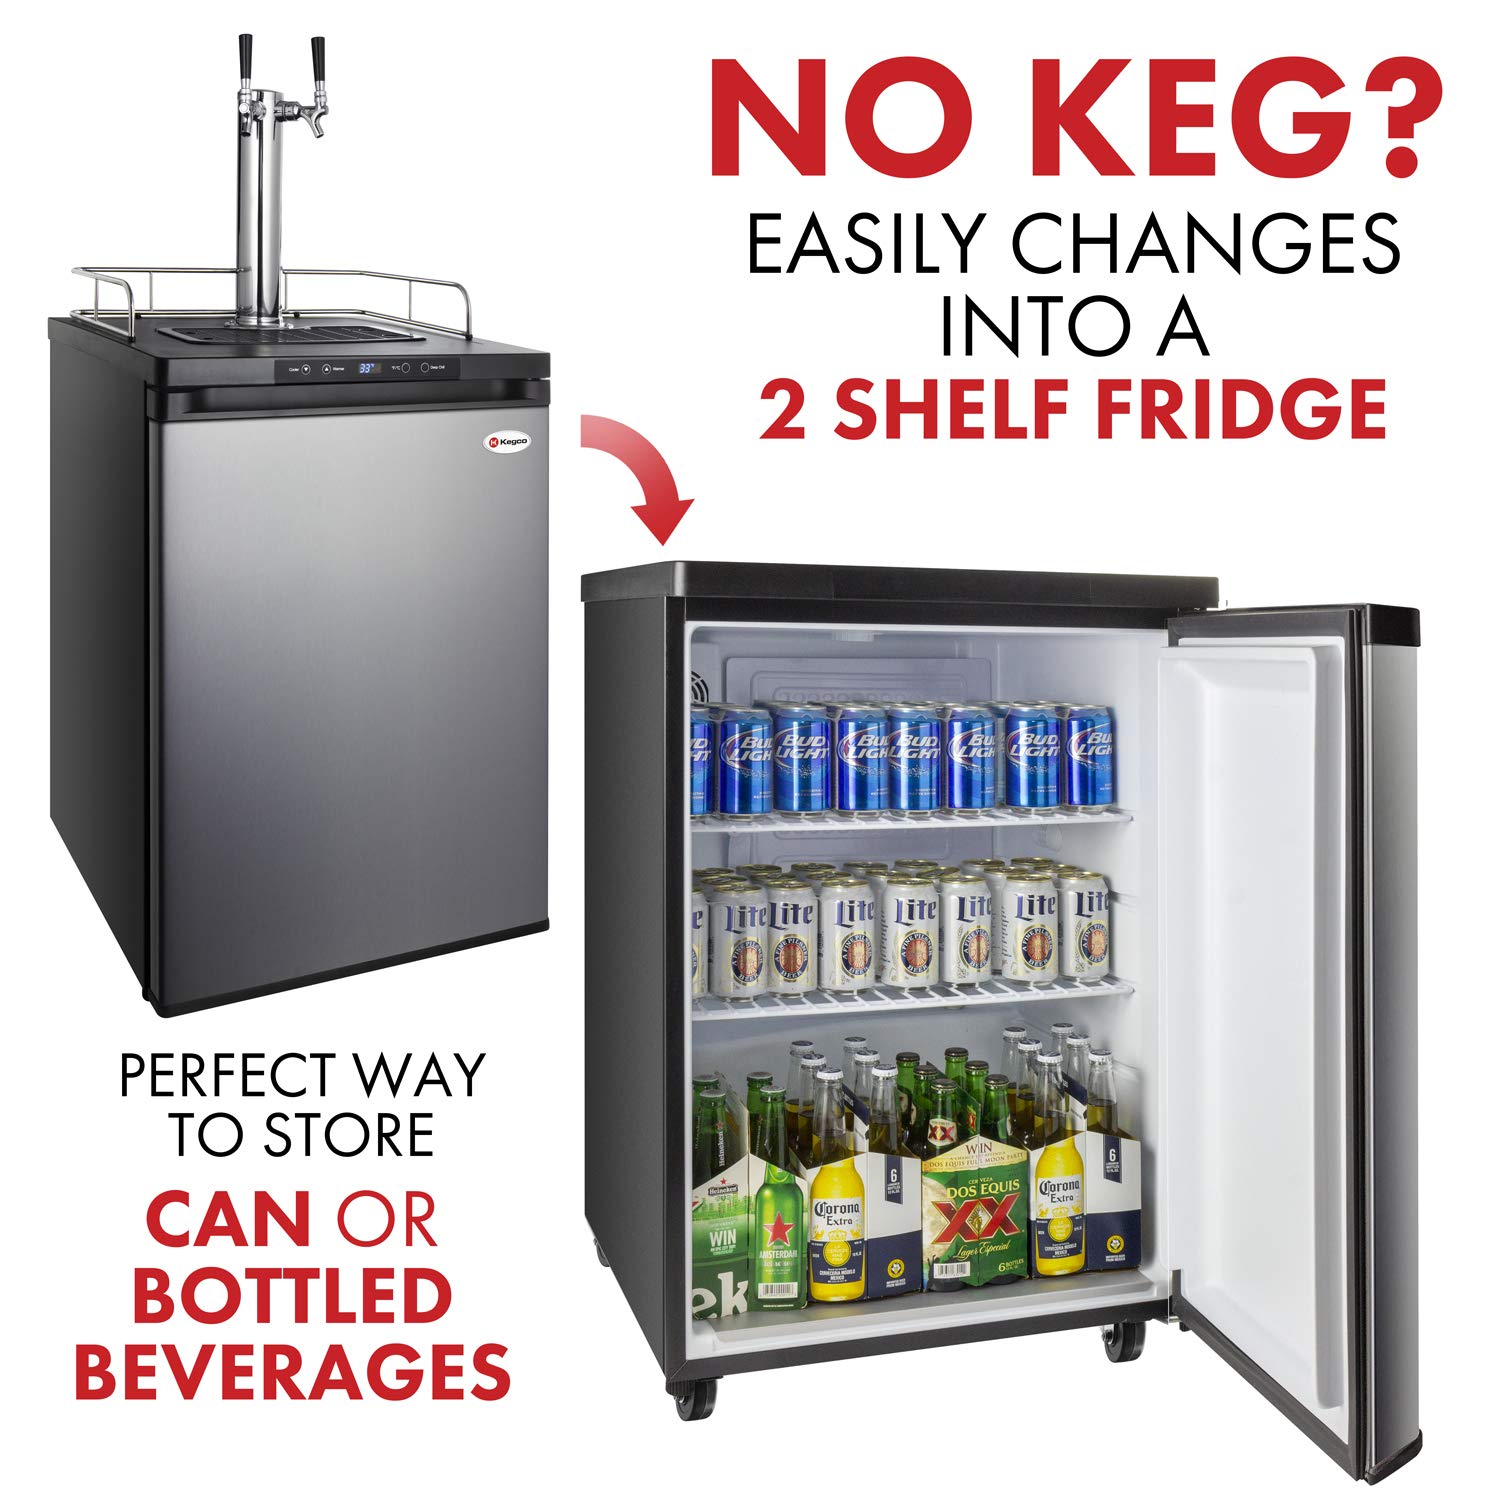 Kegco HBK309S-2K Full-Size Digital Homebrew Kegerator Dual Faucet Stainless with Ball Lock Keg, 1 count